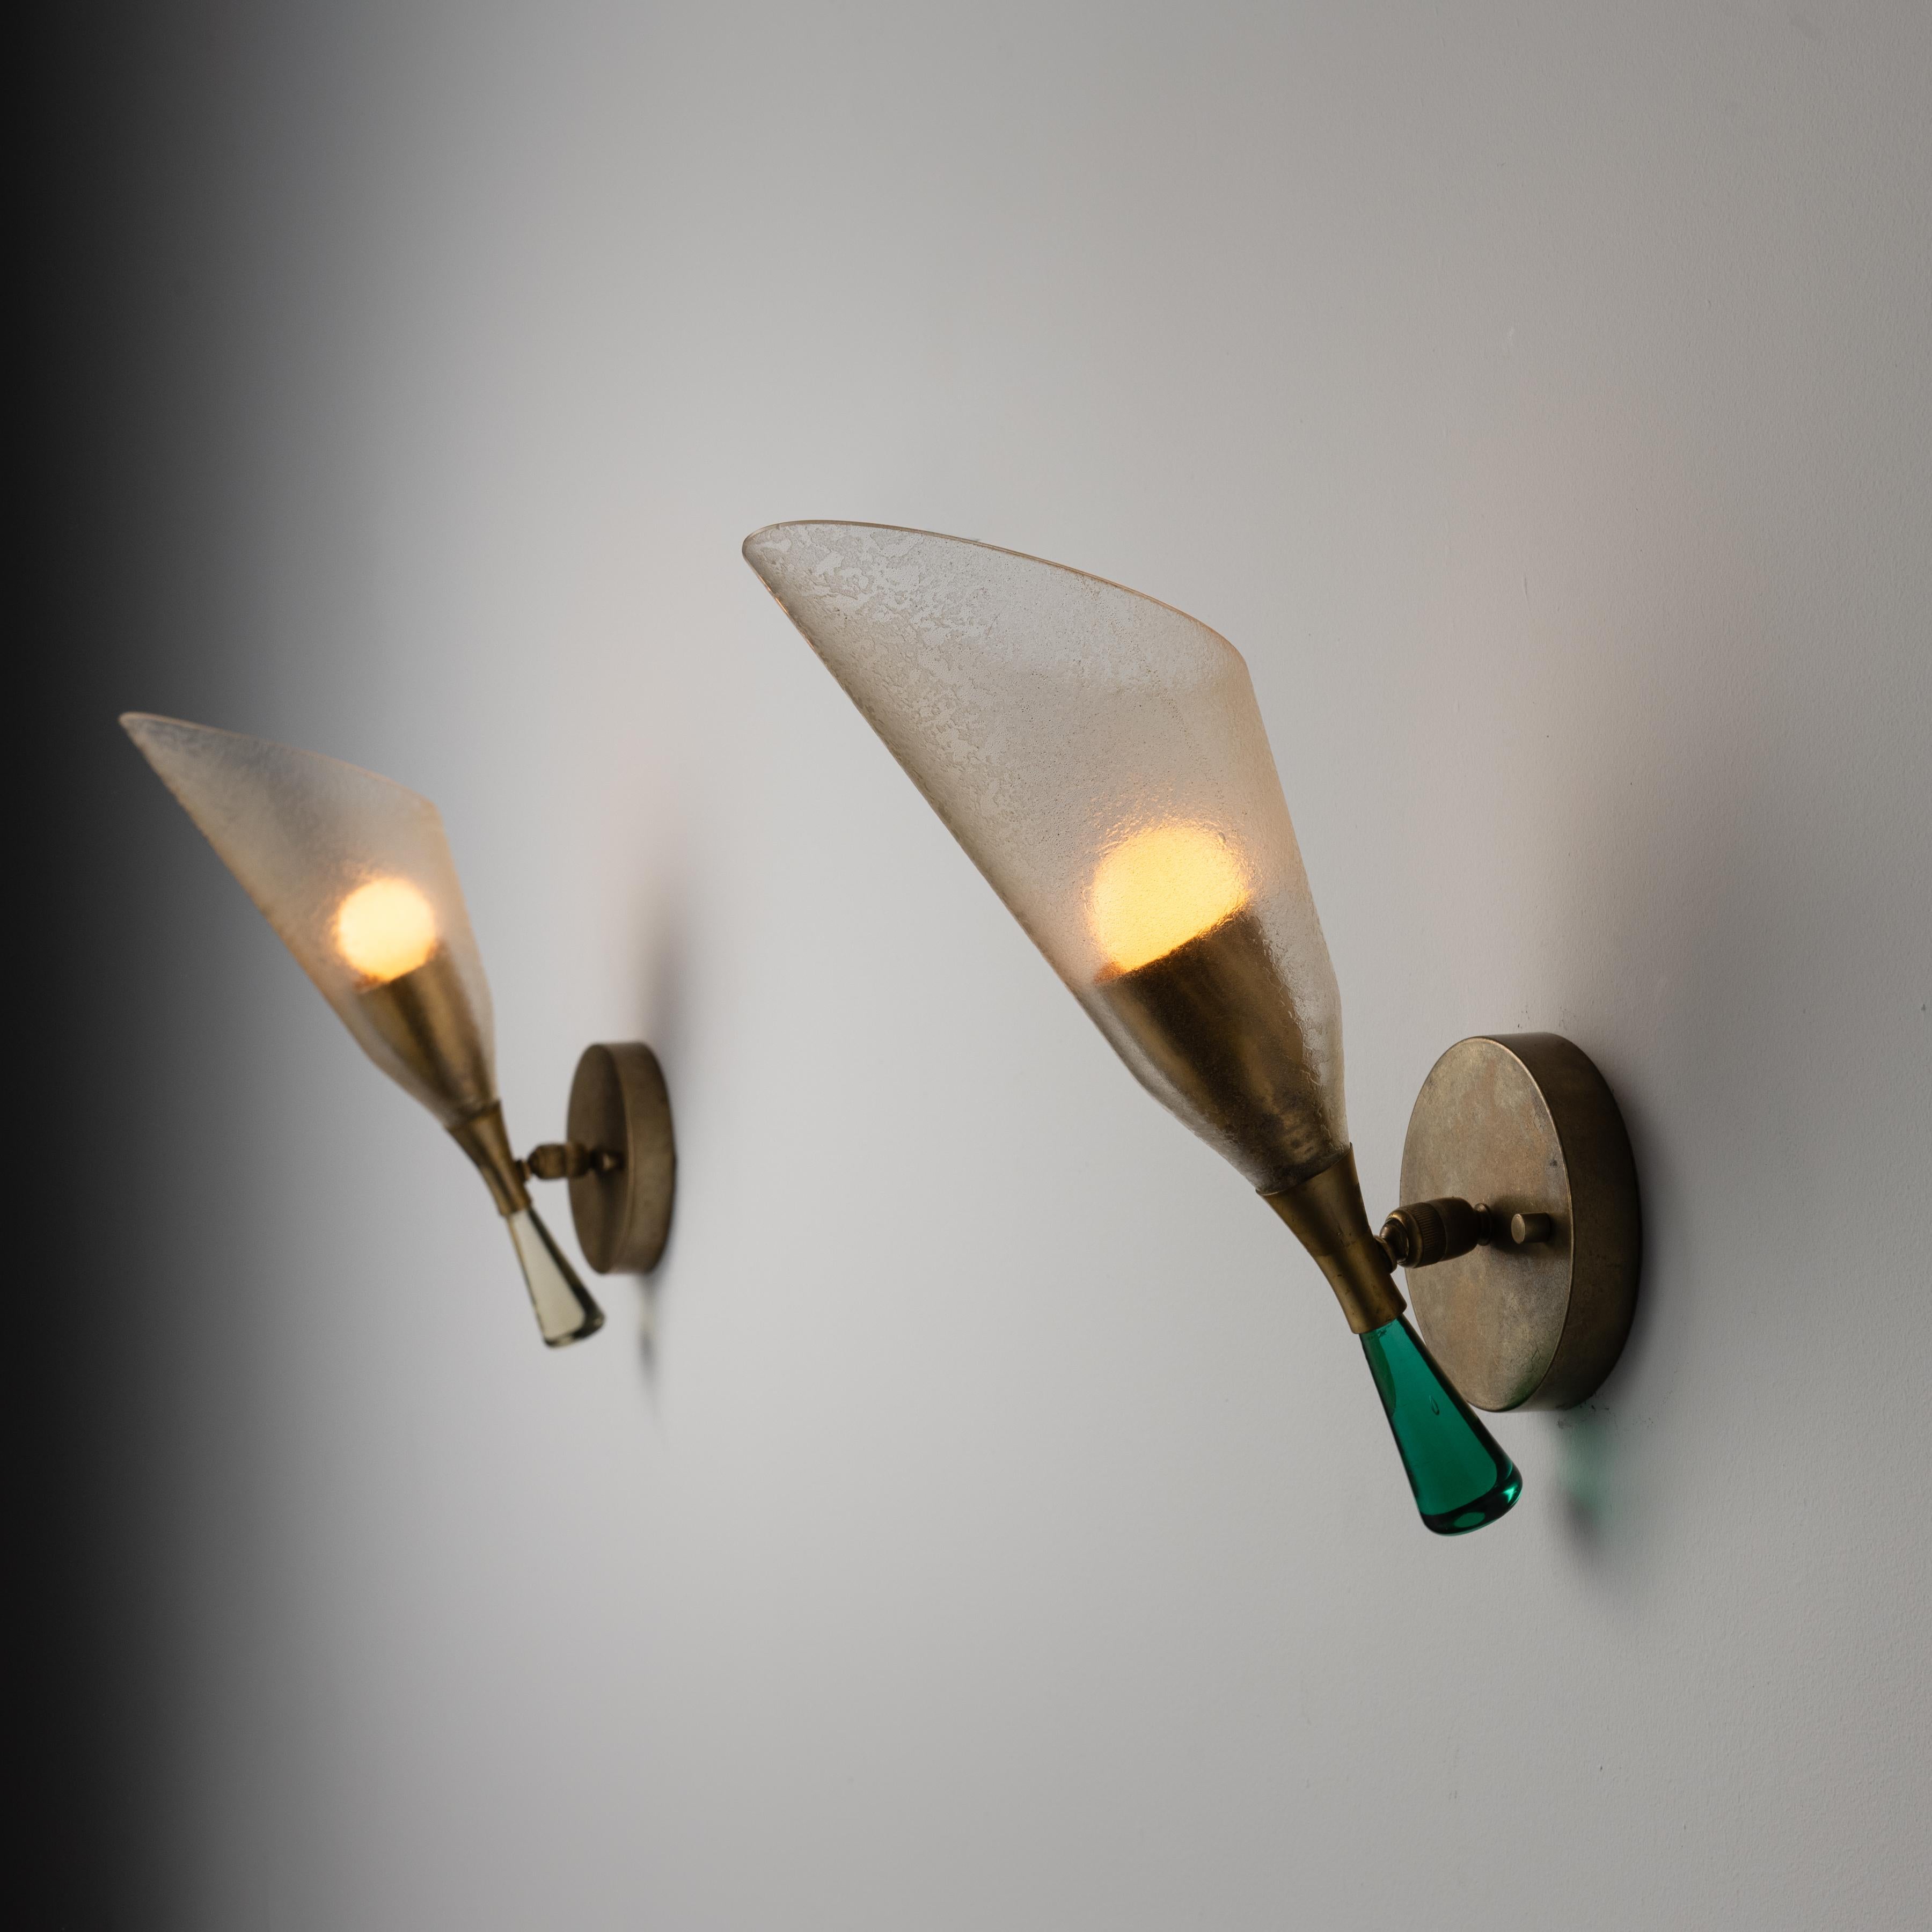 Pair of Sconces by Seguso Vetri d'Arte. Designed and manufactured in Italy, circa the 1960s. Two of the same model, but different finishes to the bottom glass stem finial. Each sconce comprises of a beautiful one-of-a-kind etched glass tulip glass,